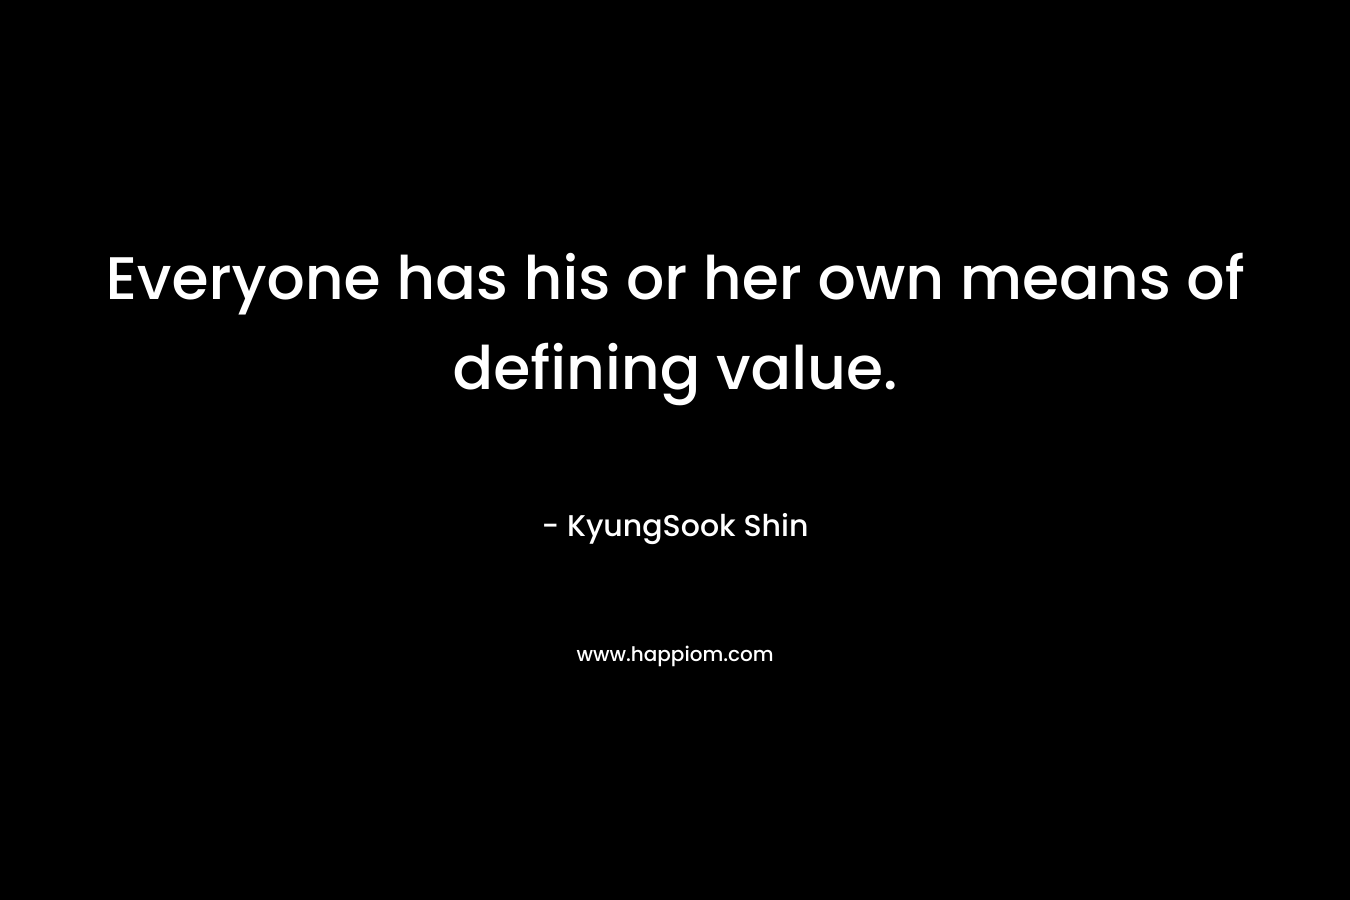 Everyone has his or her own means of defining value.